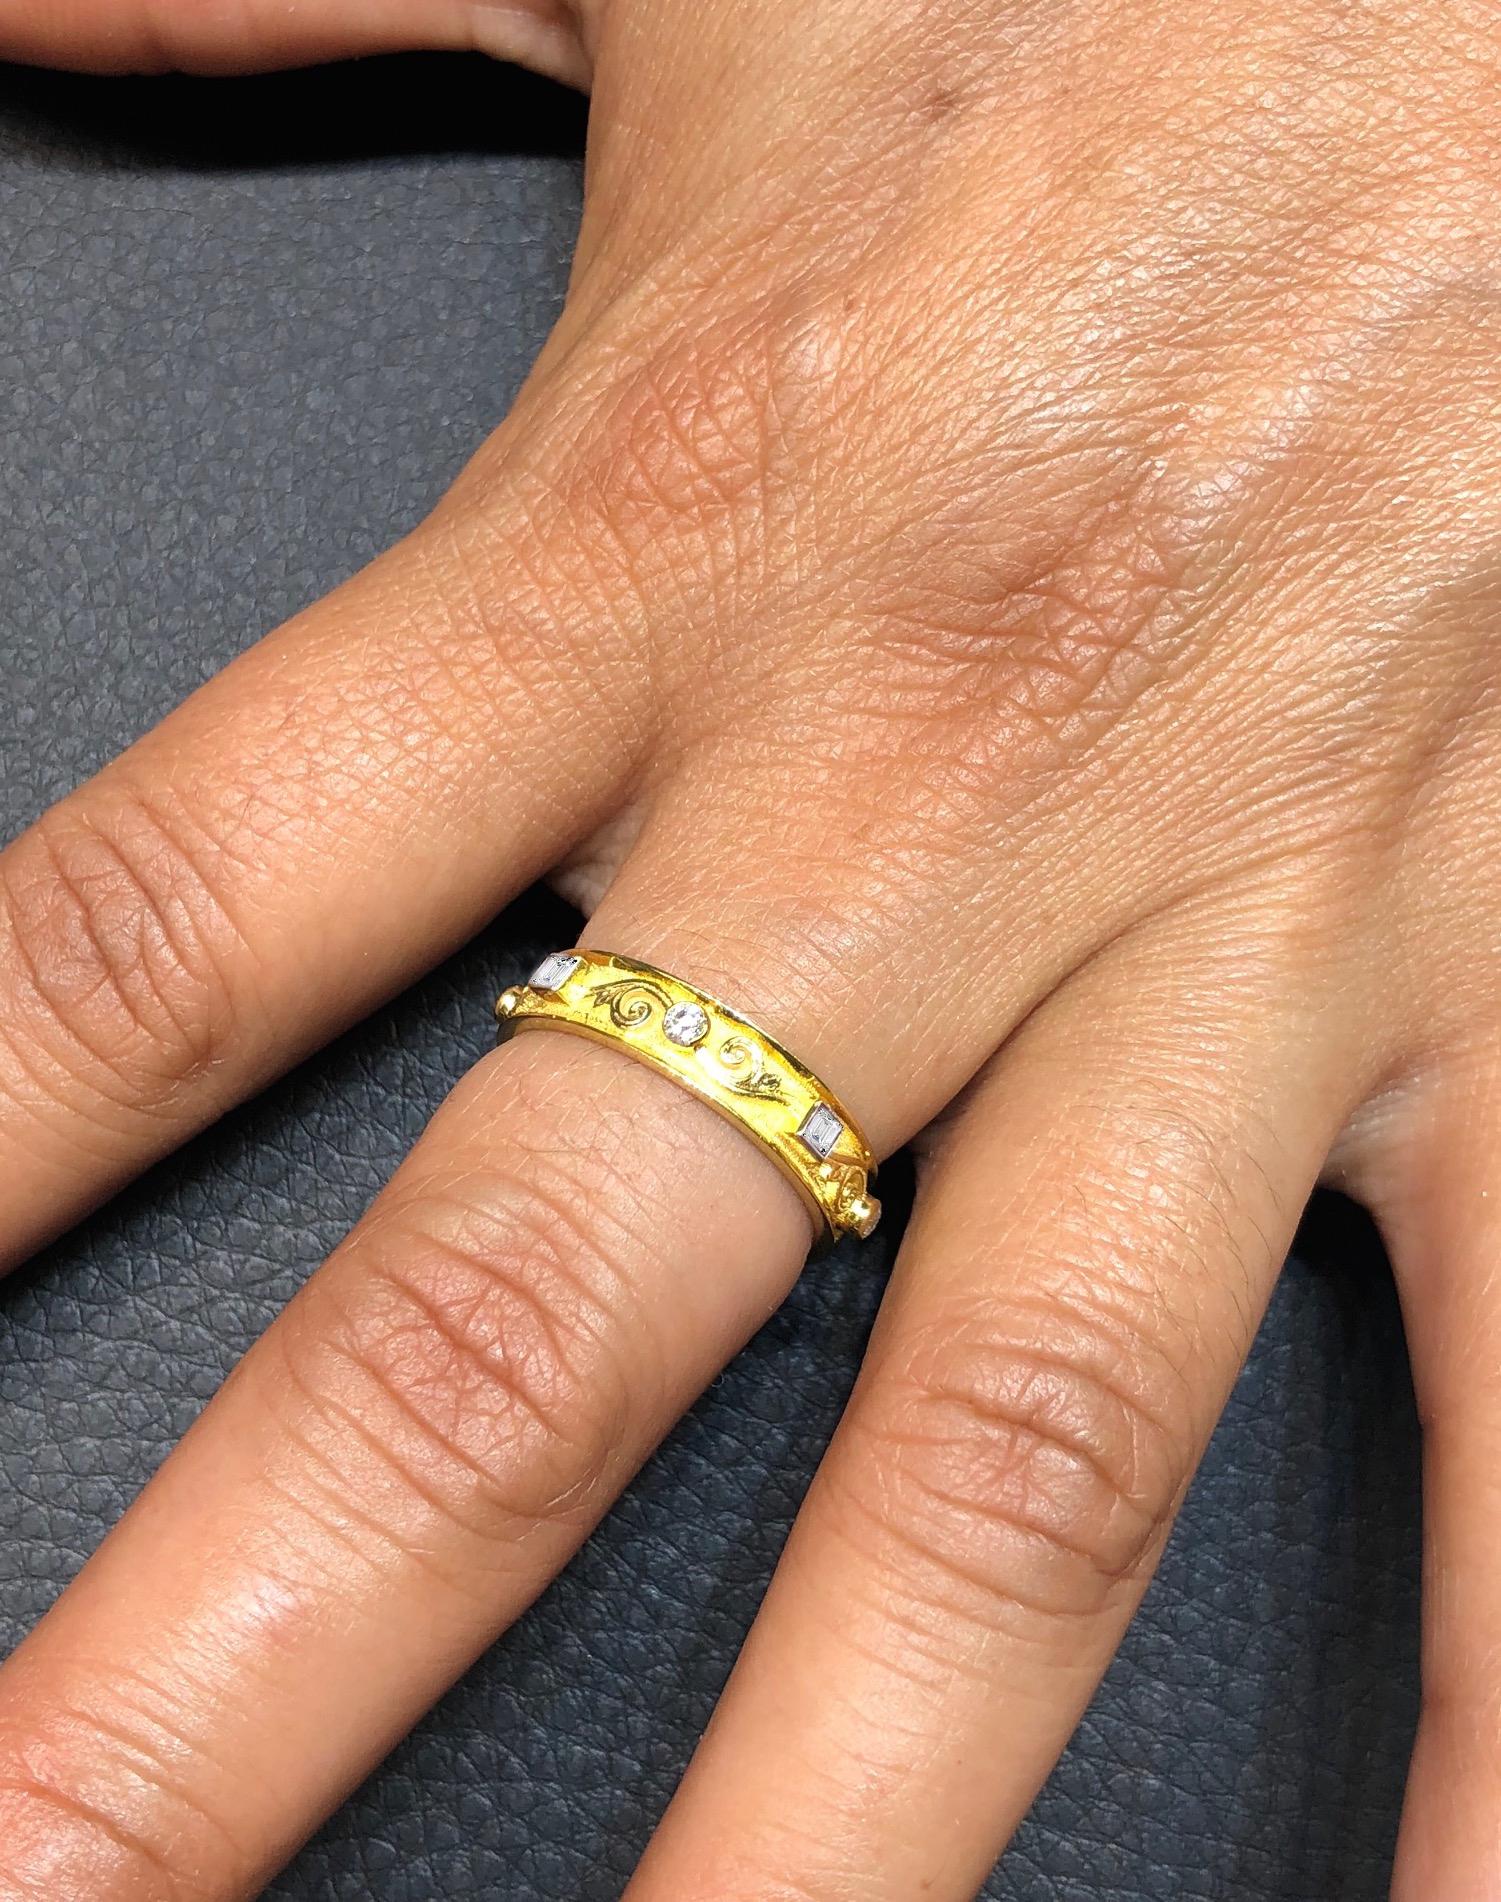 S.Georgios design ring is handmade from solid 18 Karat Yellow Gold and is microscopically decorated all around with gold beads and wires, granulation work is done all by hand - the Greek design symbolizing eternal life. This band features 4